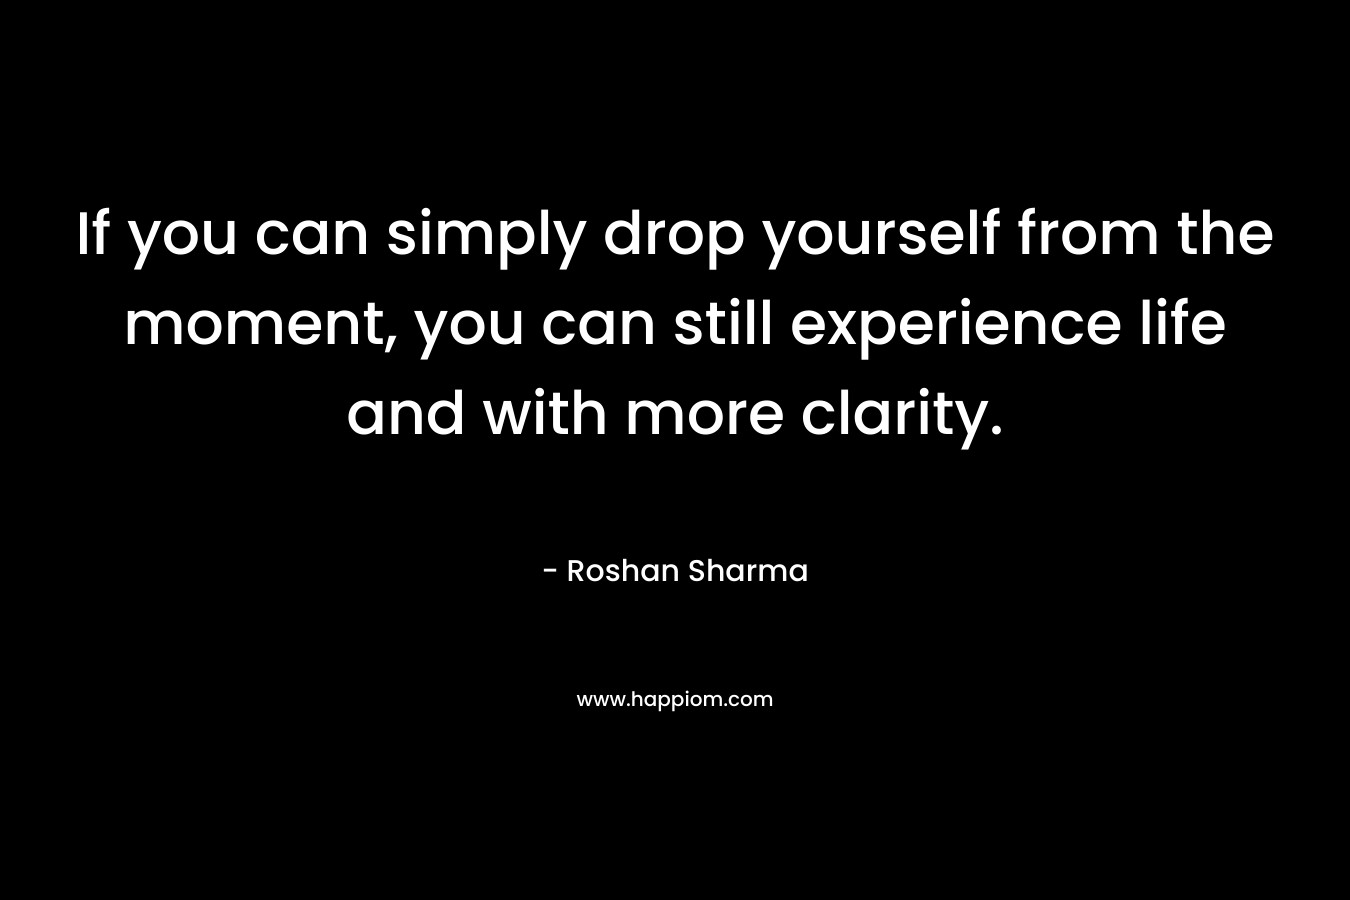 If you can simply drop yourself from the moment, you can still experience life and with more clarity. – Roshan Sharma